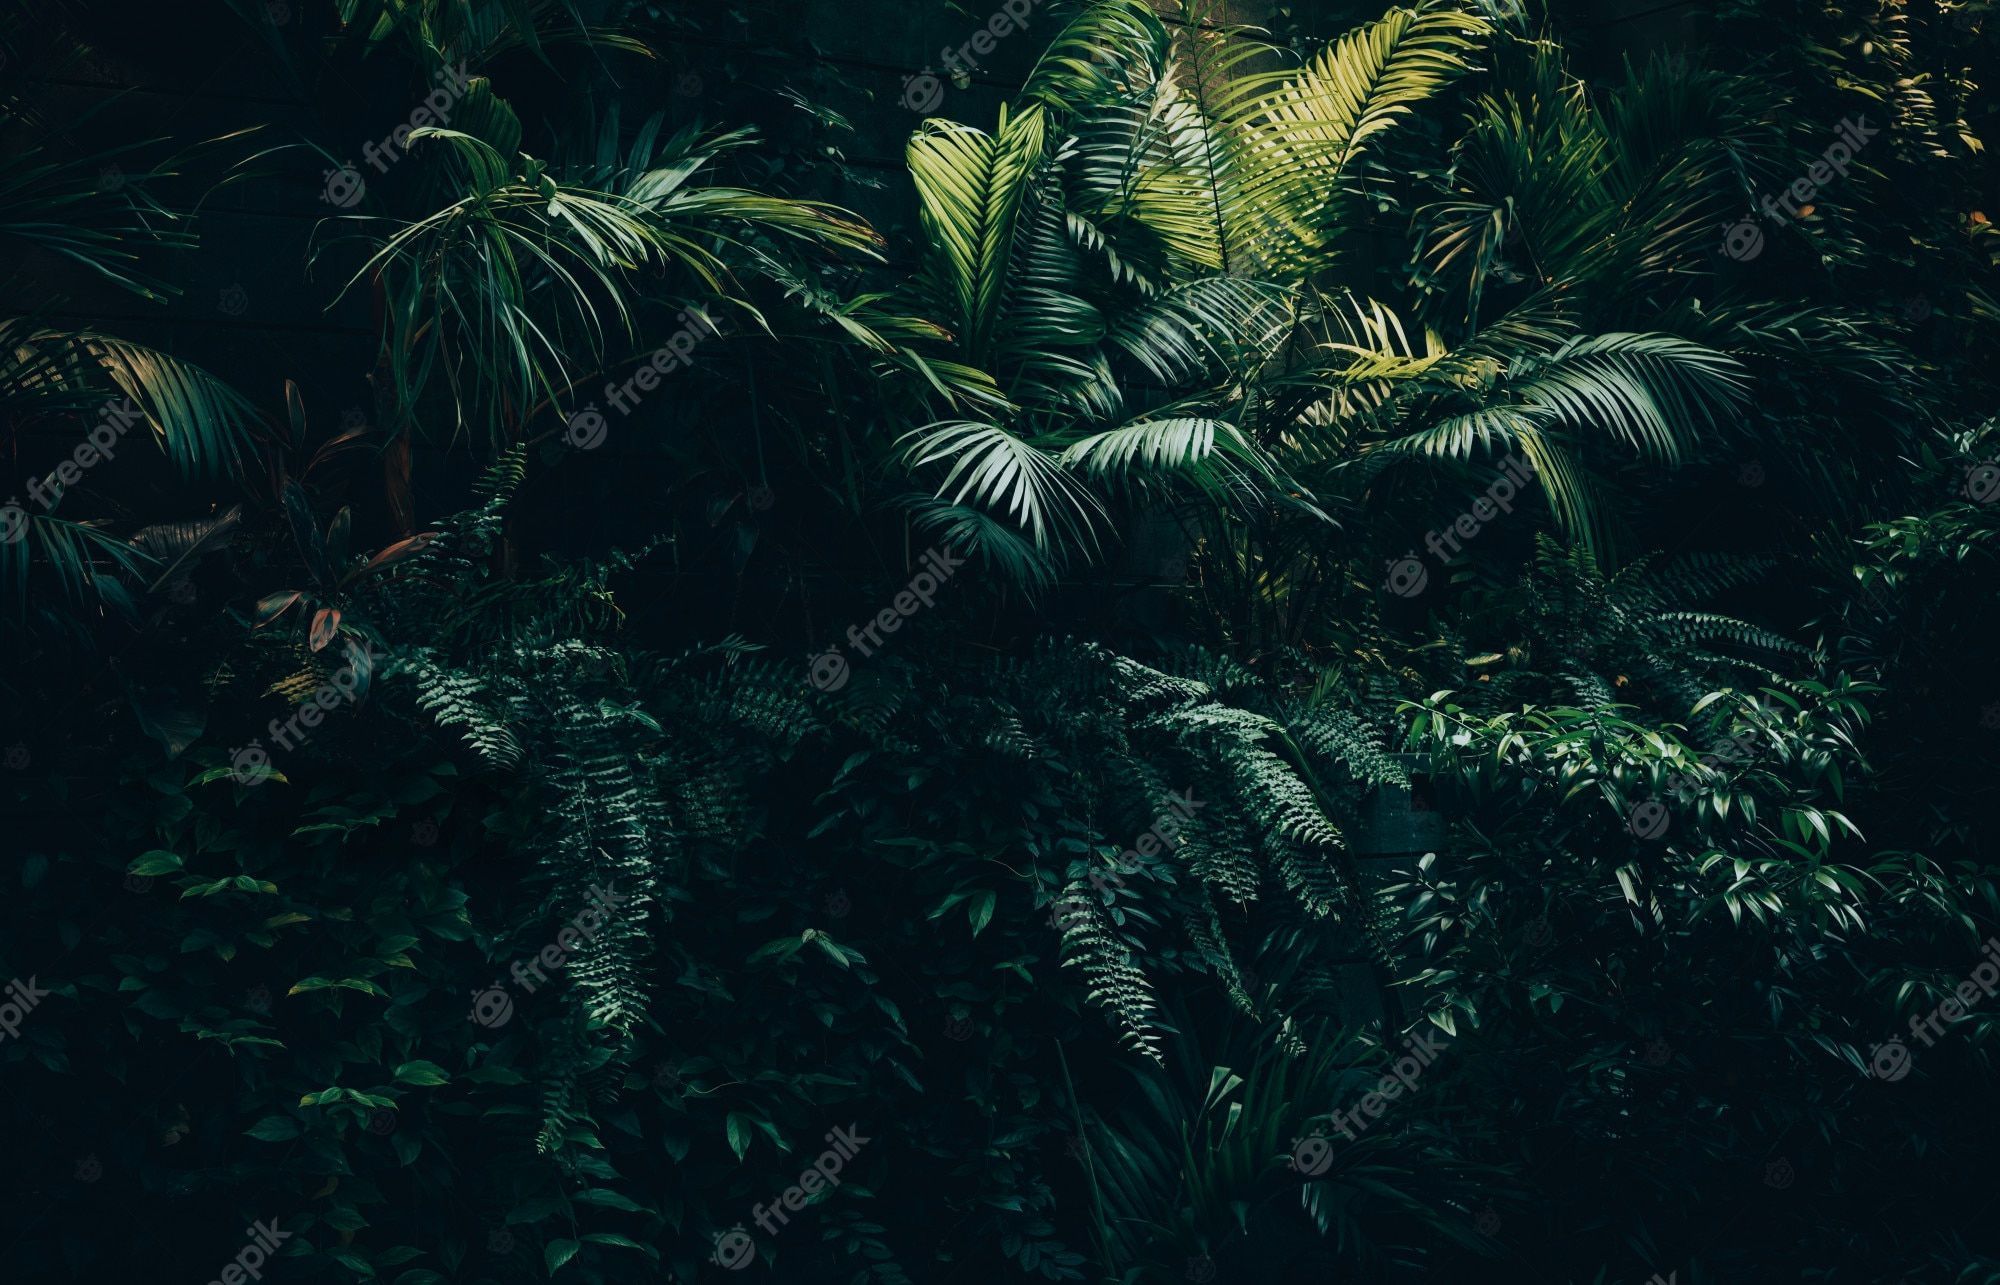 A tropical jungle with green plants and palm trees - Jungle